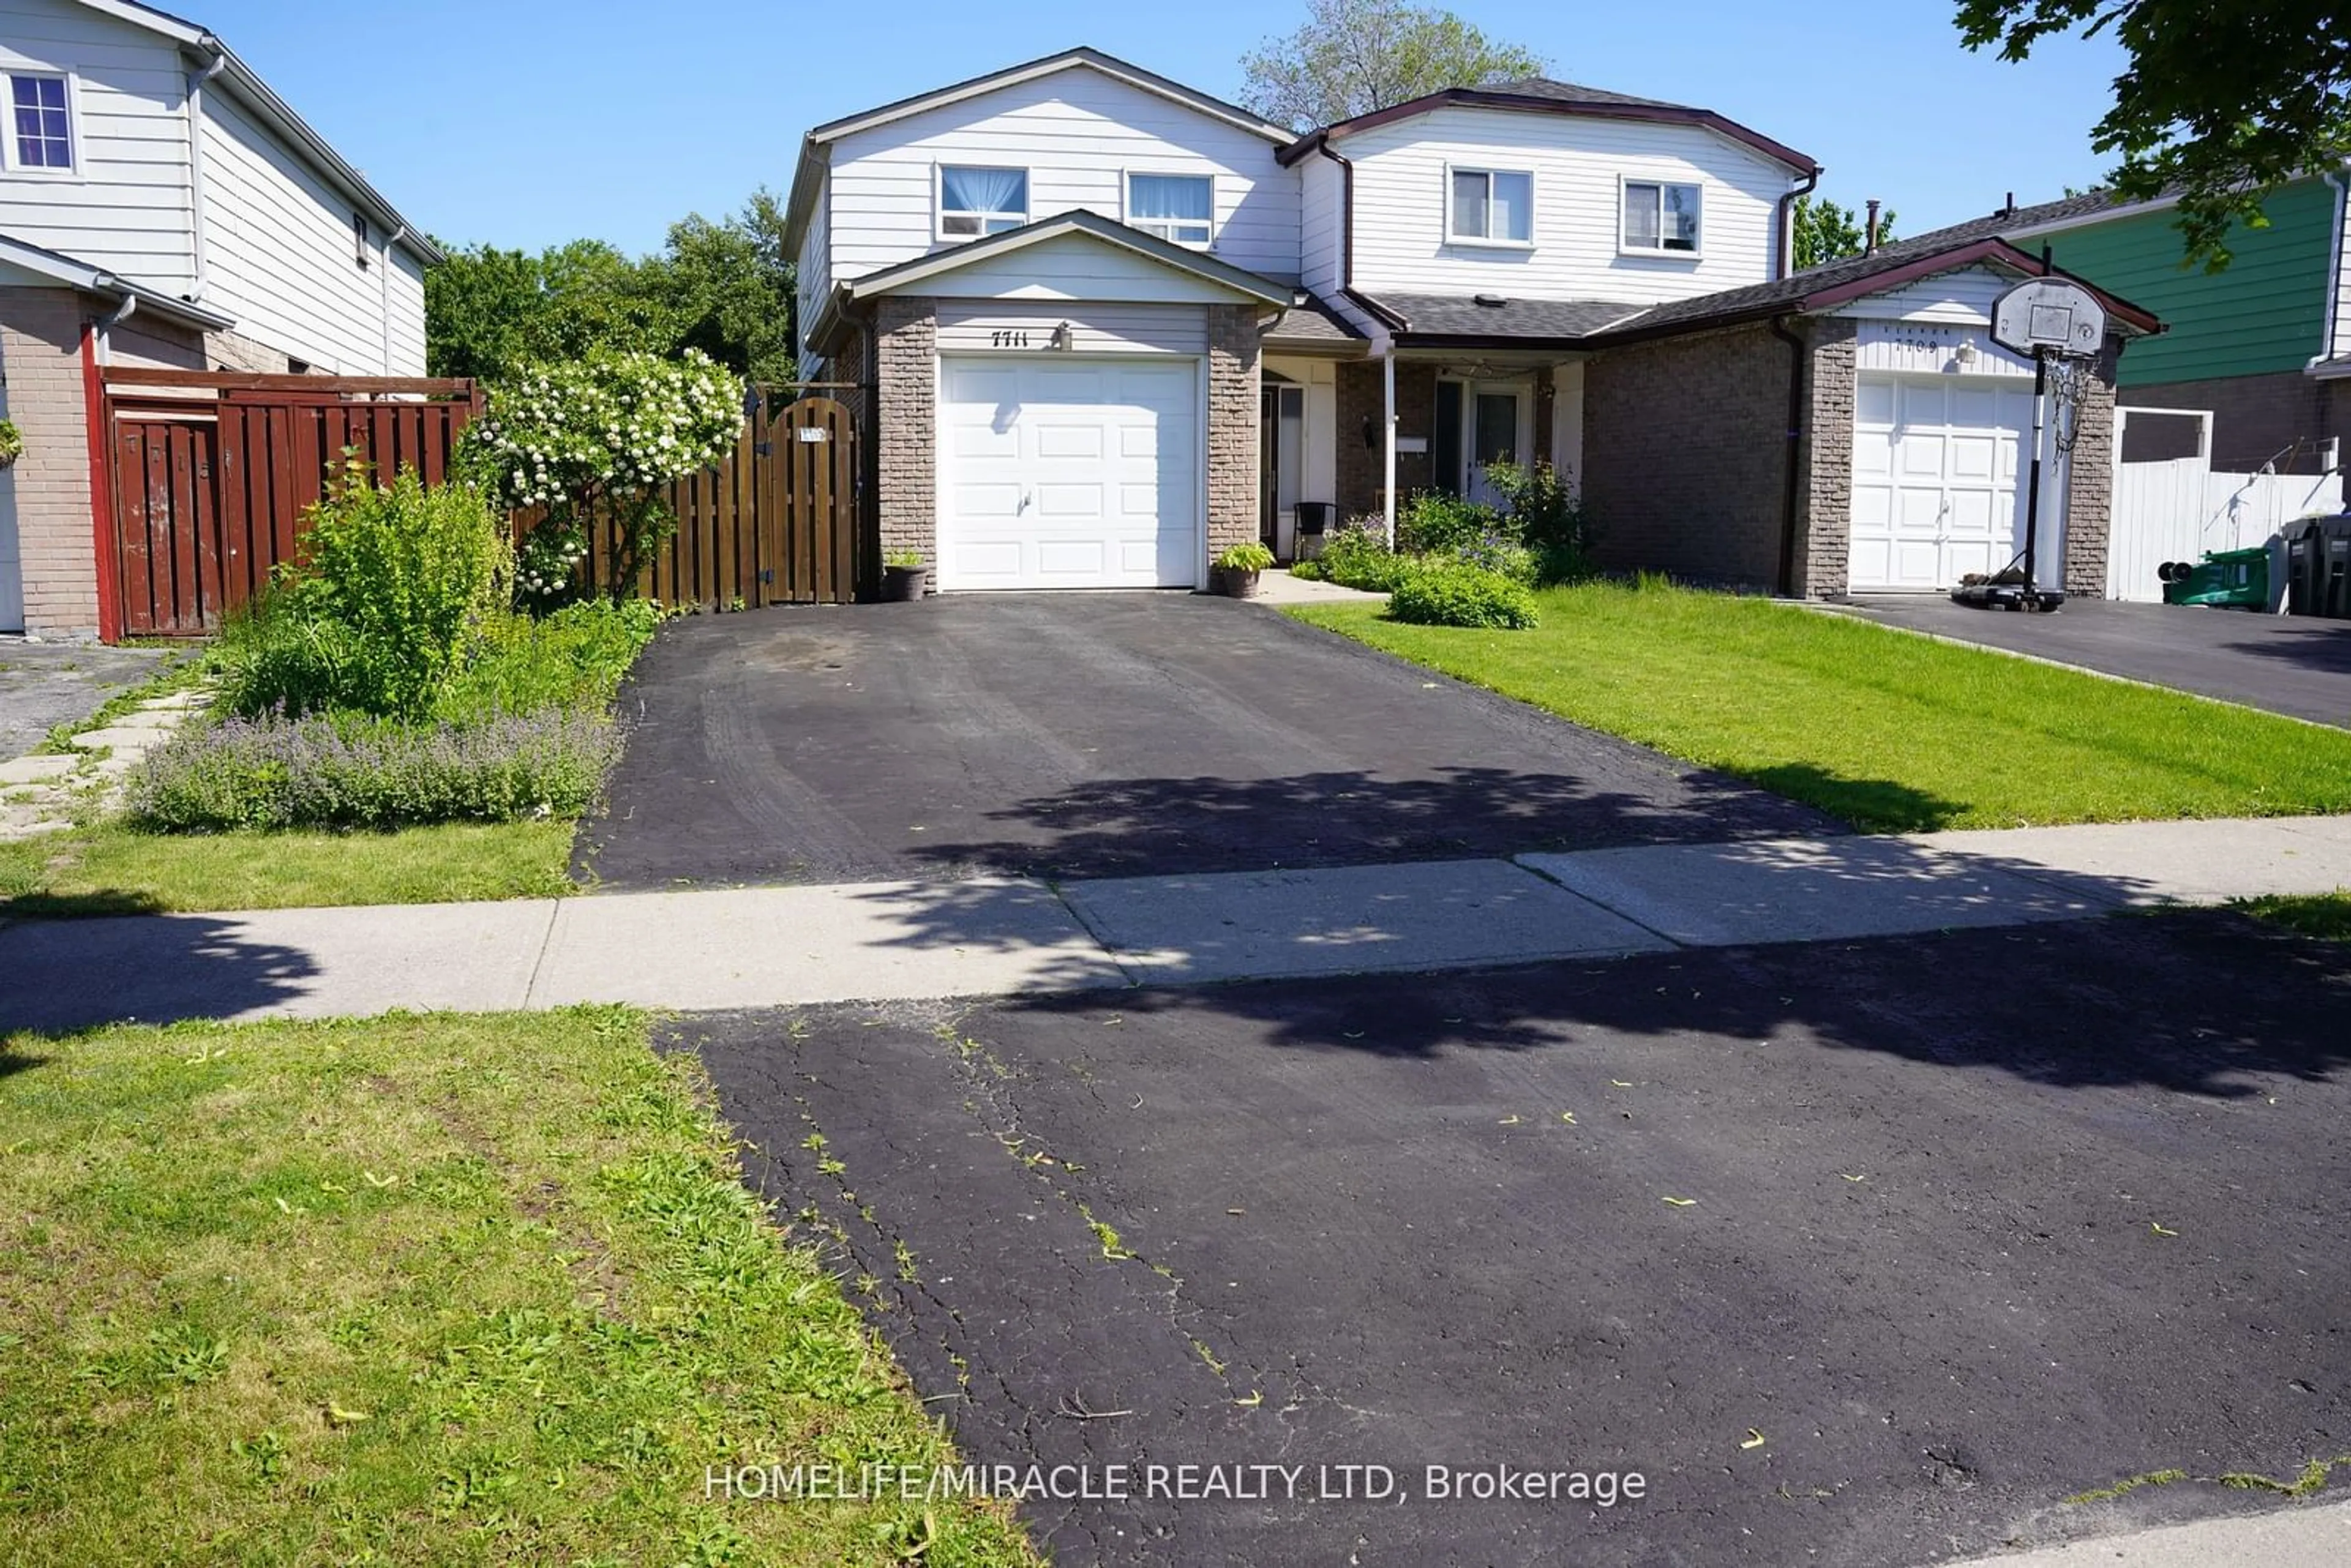 Frontside or backside of a home for 7711 BENAVON Rd, Mississauga Ontario L4T 3G5